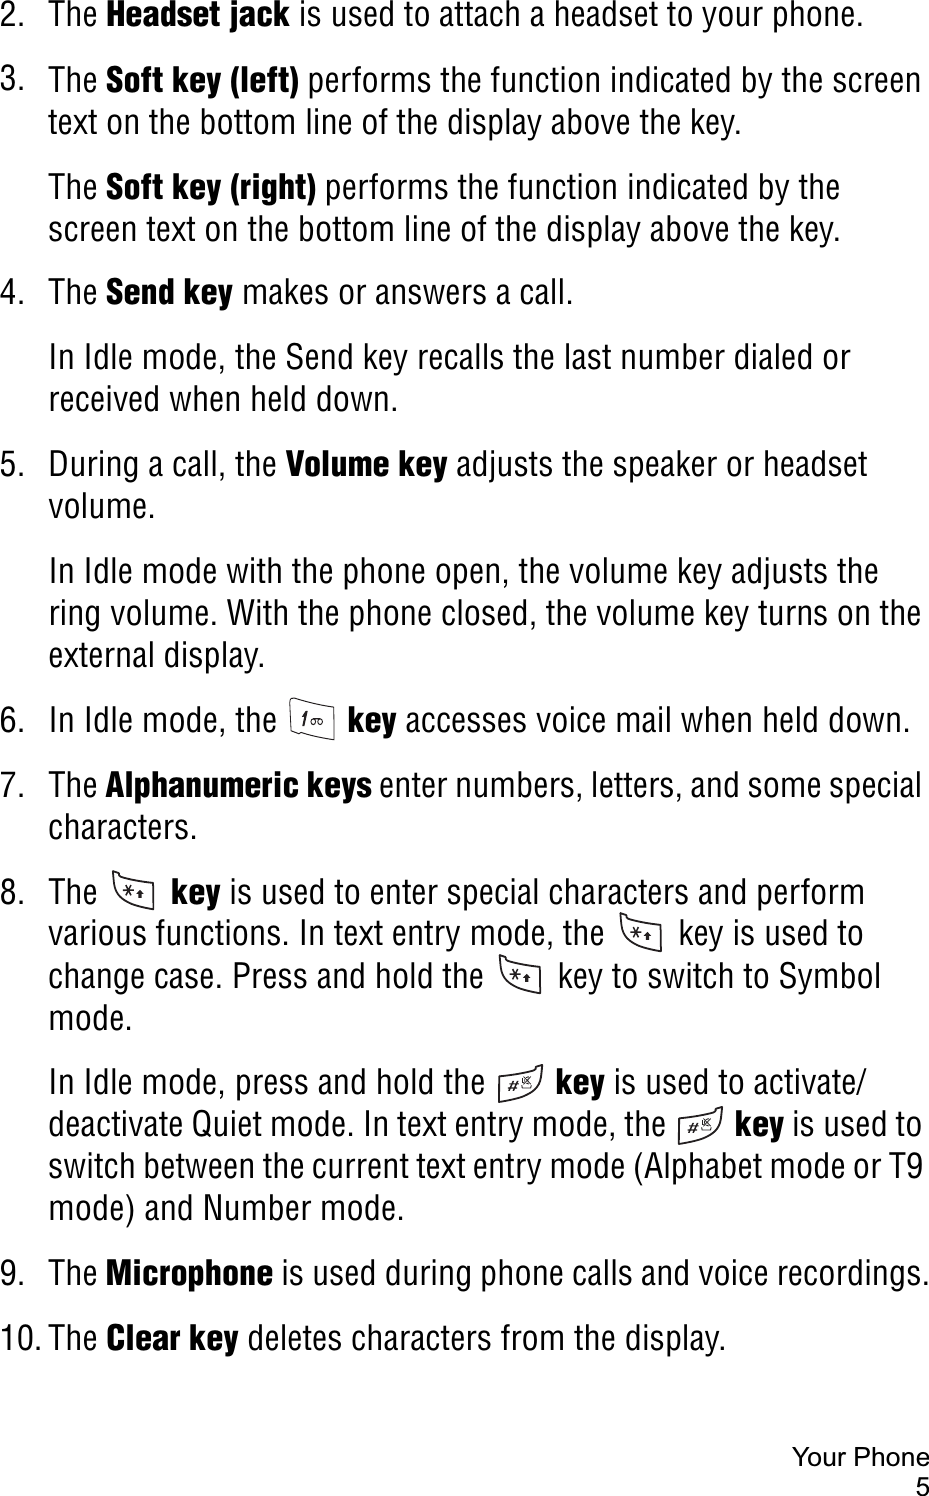 Your Phone52. The Headset jack is used to attach a headset to your phone.3. The Soft key (left) performs the function indicated by the screen text on the bottom line of the display above the key.The Soft key (right) performs the function indicated by the screen text on the bottom line of the display above the key.4. The Send key makes or answers a call.In Idle mode, the Send key recalls the last number dialed or received when held down.5. During a call, the Volume key adjusts the speaker or headset volume.In Idle mode with the phone open, the volume key adjusts the ring volume. With the phone closed, the volume key turns on the external display.6. In Idle mode, the   key accesses voice mail when held down.7. The Alphanumeric keys enter numbers, letters, and some special characters.8. The   key is used to enter special characters and perform various functions. In text entry mode, the   key is used to change case. Press and hold the   key to switch to Symbol mode.In Idle mode, press and hold the   key is used to activate/deactivate Quiet mode. In text entry mode, the   key is used to switch between the current text entry mode (Alphabet mode or T9 mode) and Number mode.9. The Microphone is used during phone calls and voice recordings.10. The Clear key deletes characters from the display. 